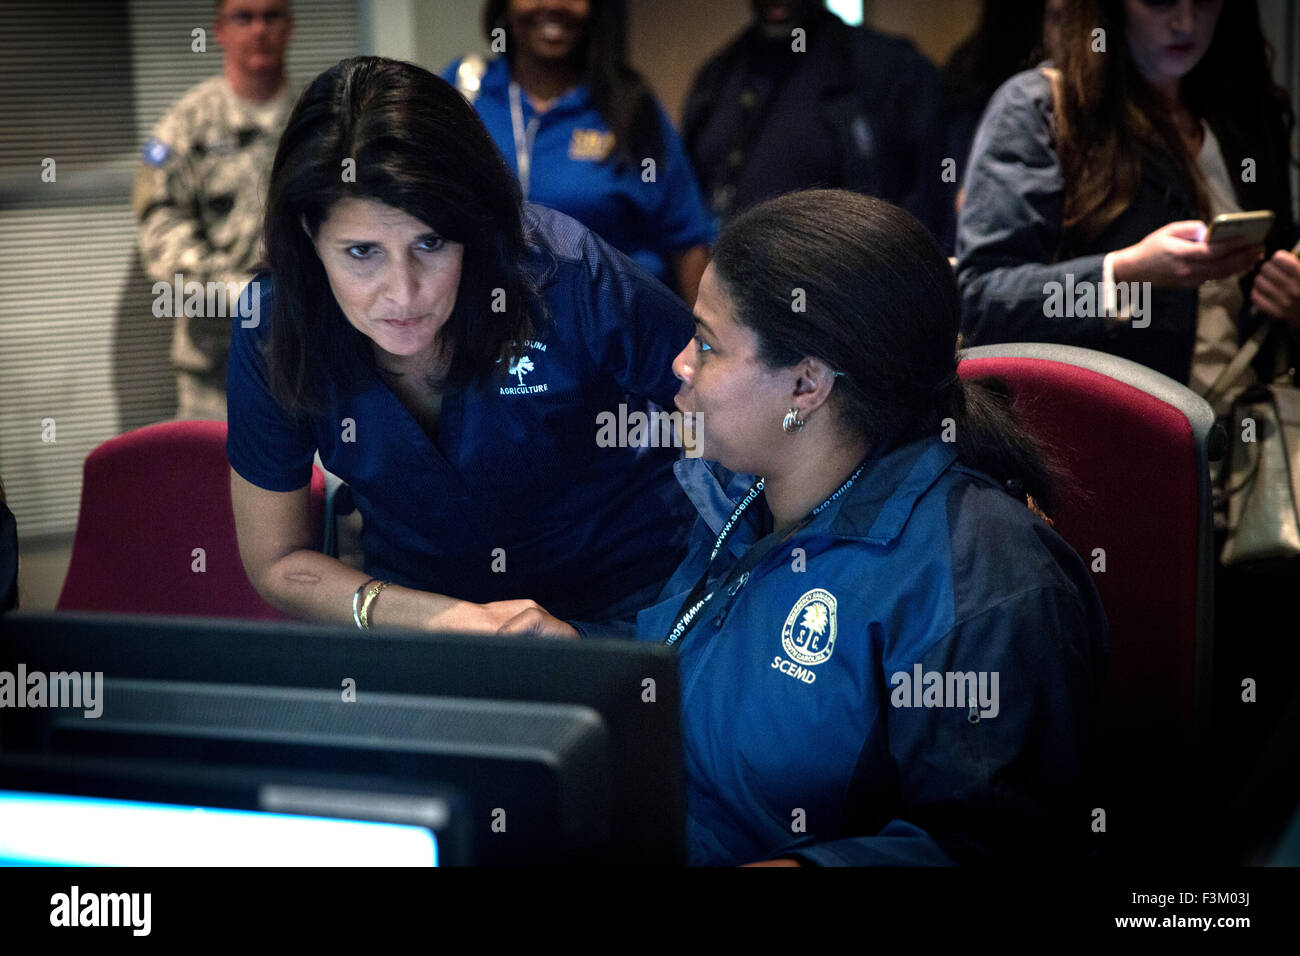 South Carolina Governor Nikki Haley thanks workers at the State Emergency Operations Center October 8, 2015 in Summerville, South Carolina. The SCEMD team have been responding to the devastating floods in the state caused by record rains. Stock Photo